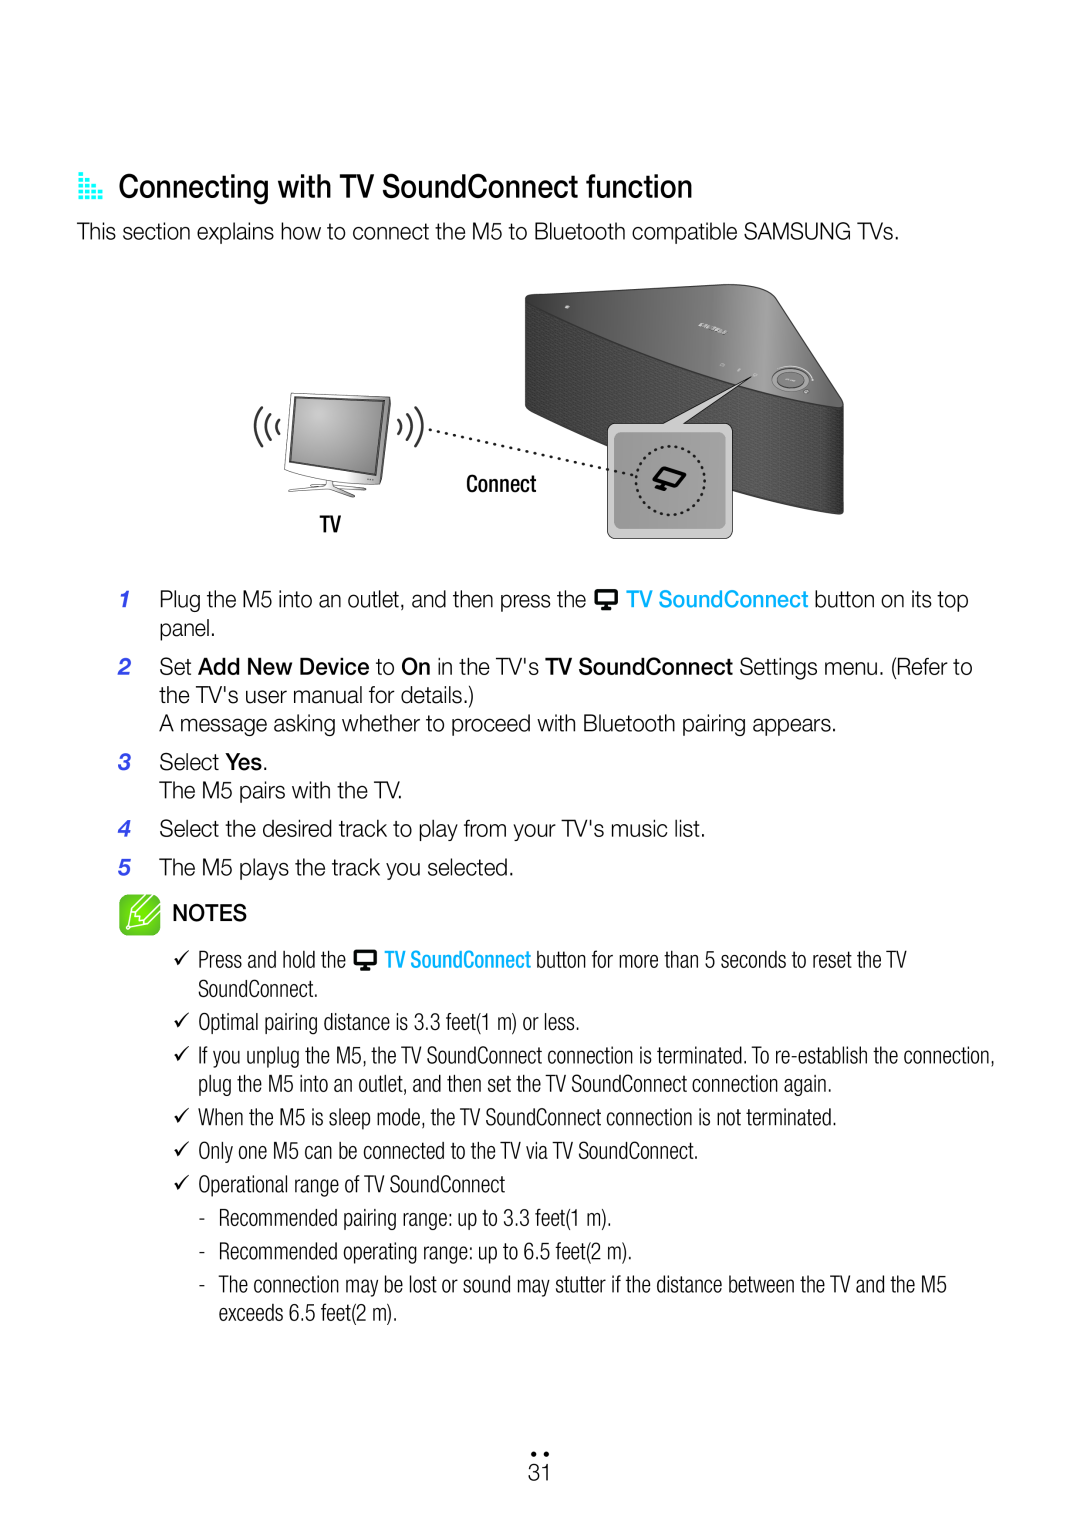 Samsung M5 user manual AA Connecting with TV SoundConnect function 